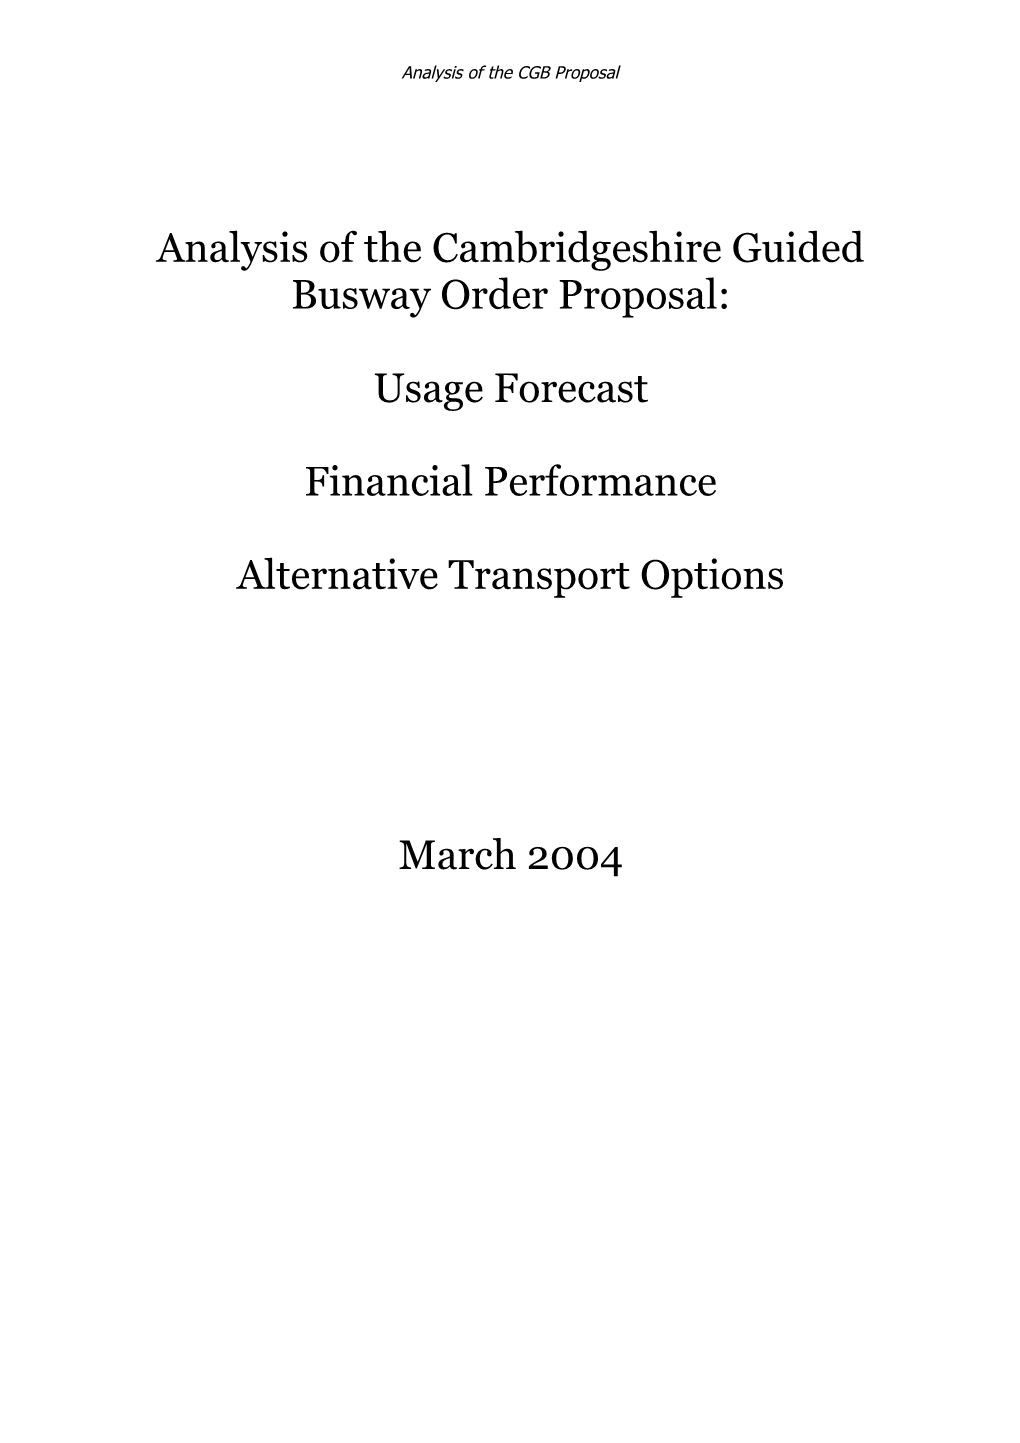 Analysis of the Cambridgeshire Guided Busway Order Proposal